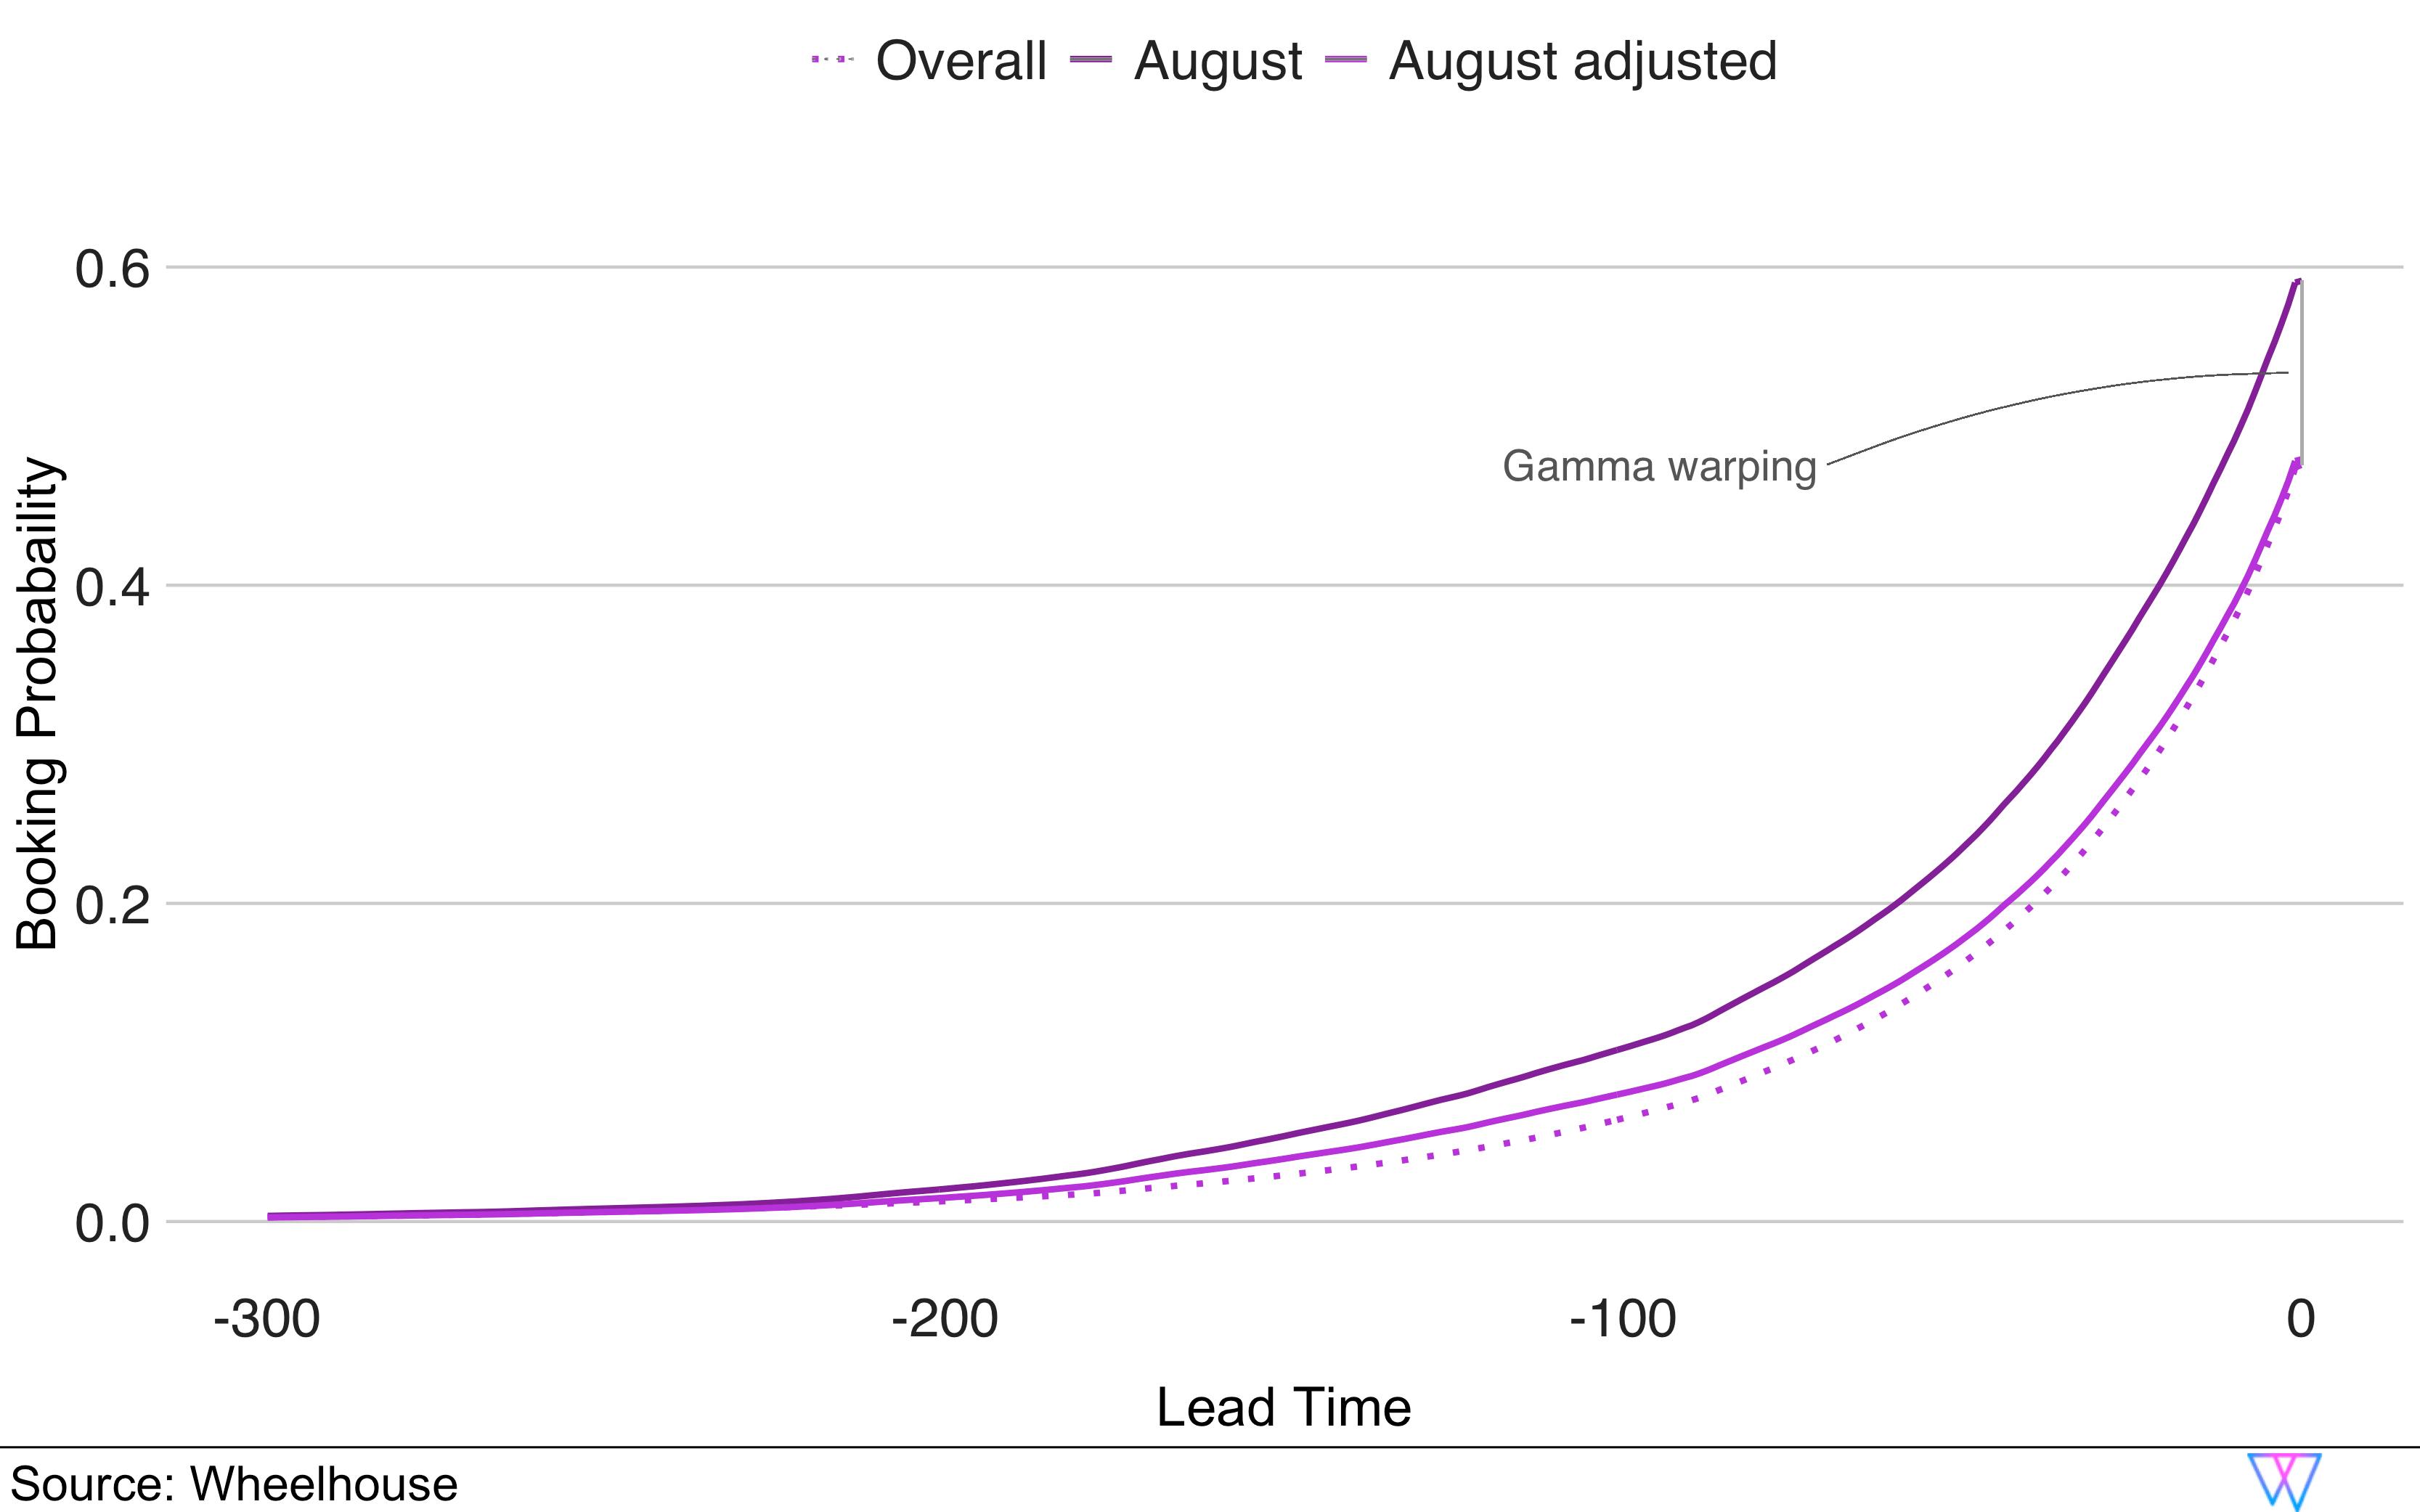 Booking probability to lead time in August